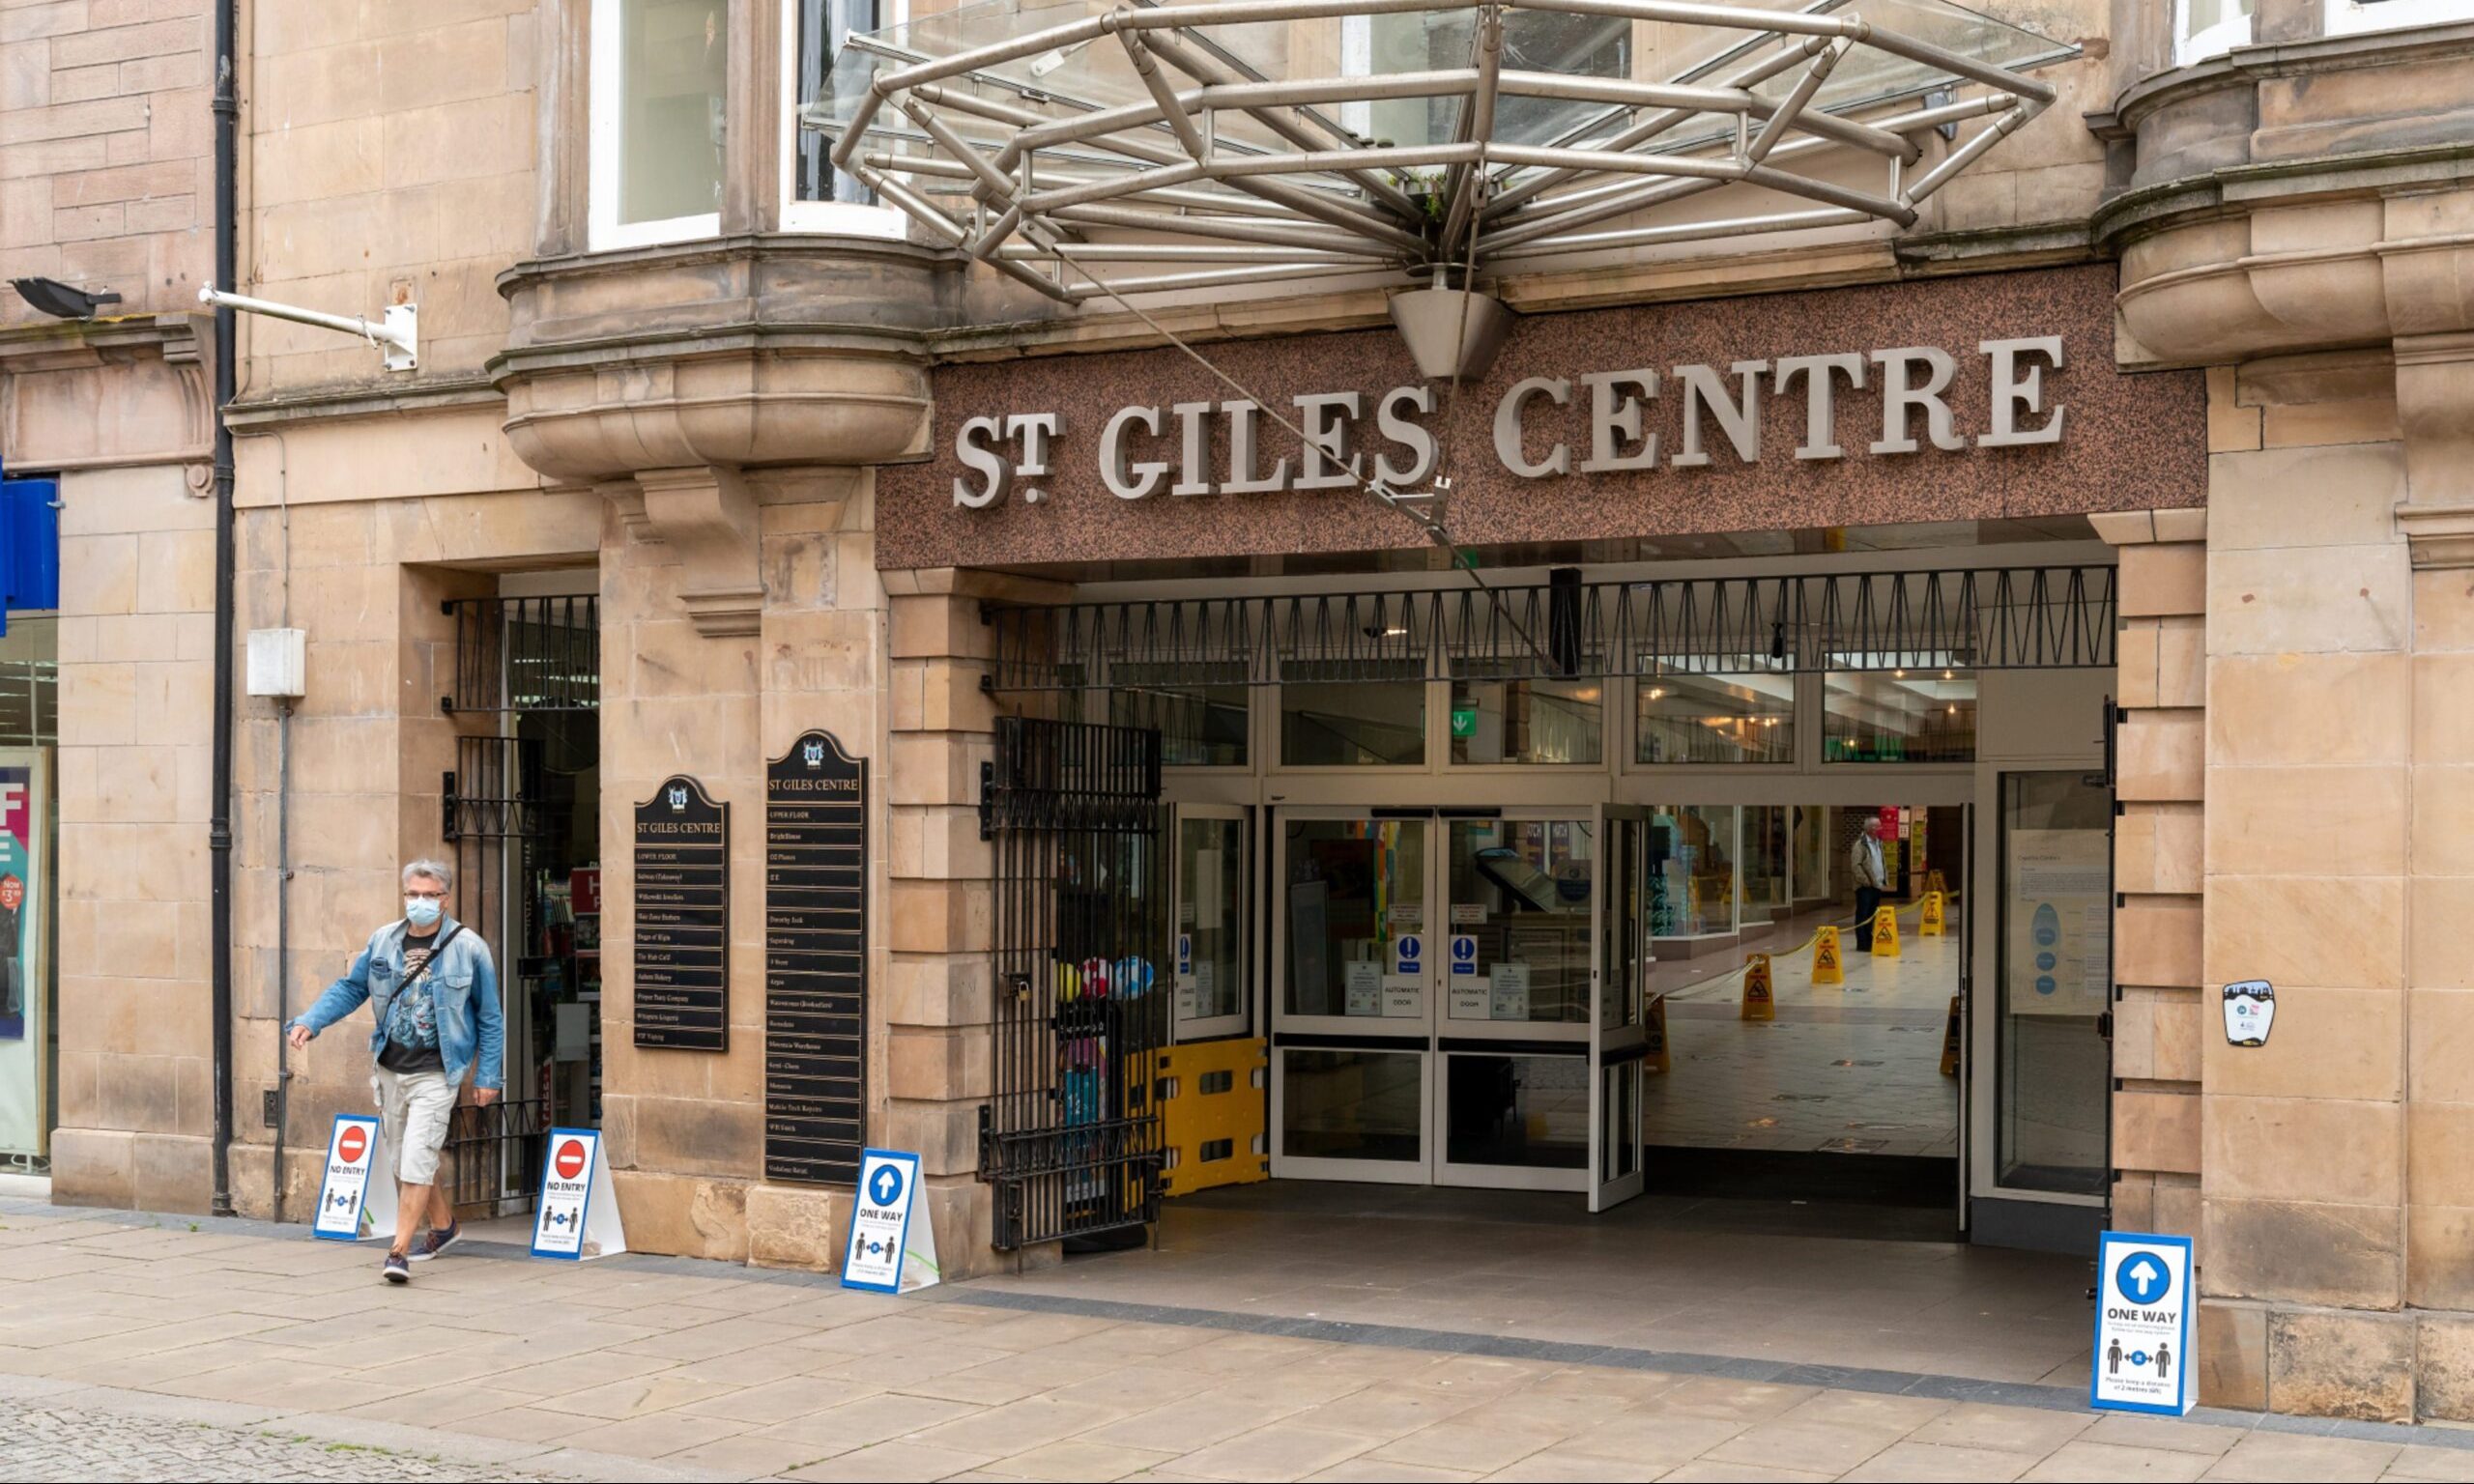 High Street entrance to the St Giles Centre.